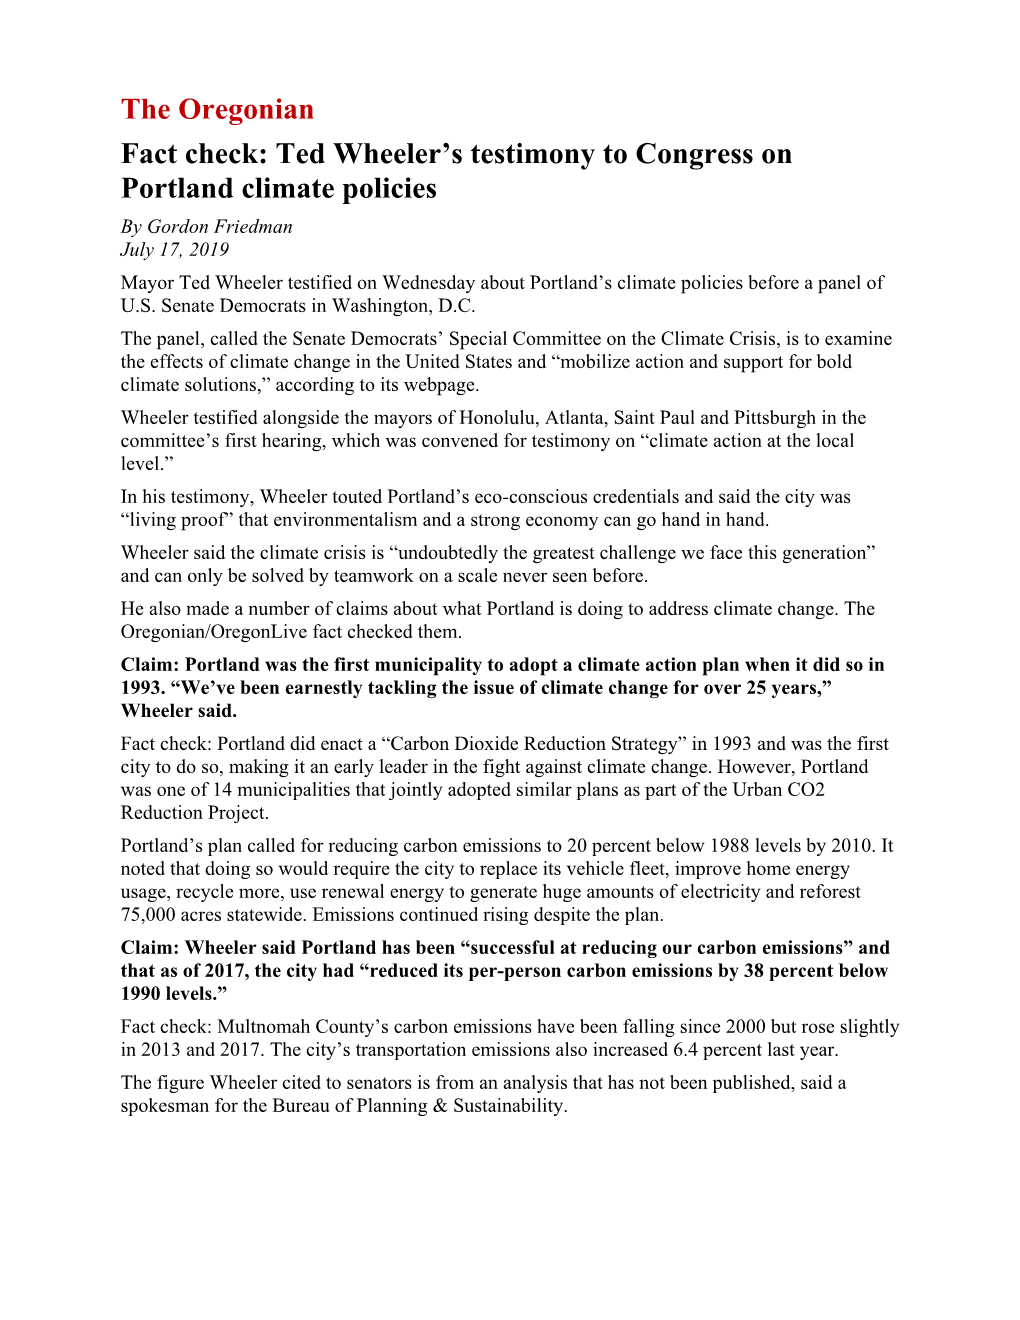 Ted Wheeler's Testimony to Congress on Portland Climate Policies